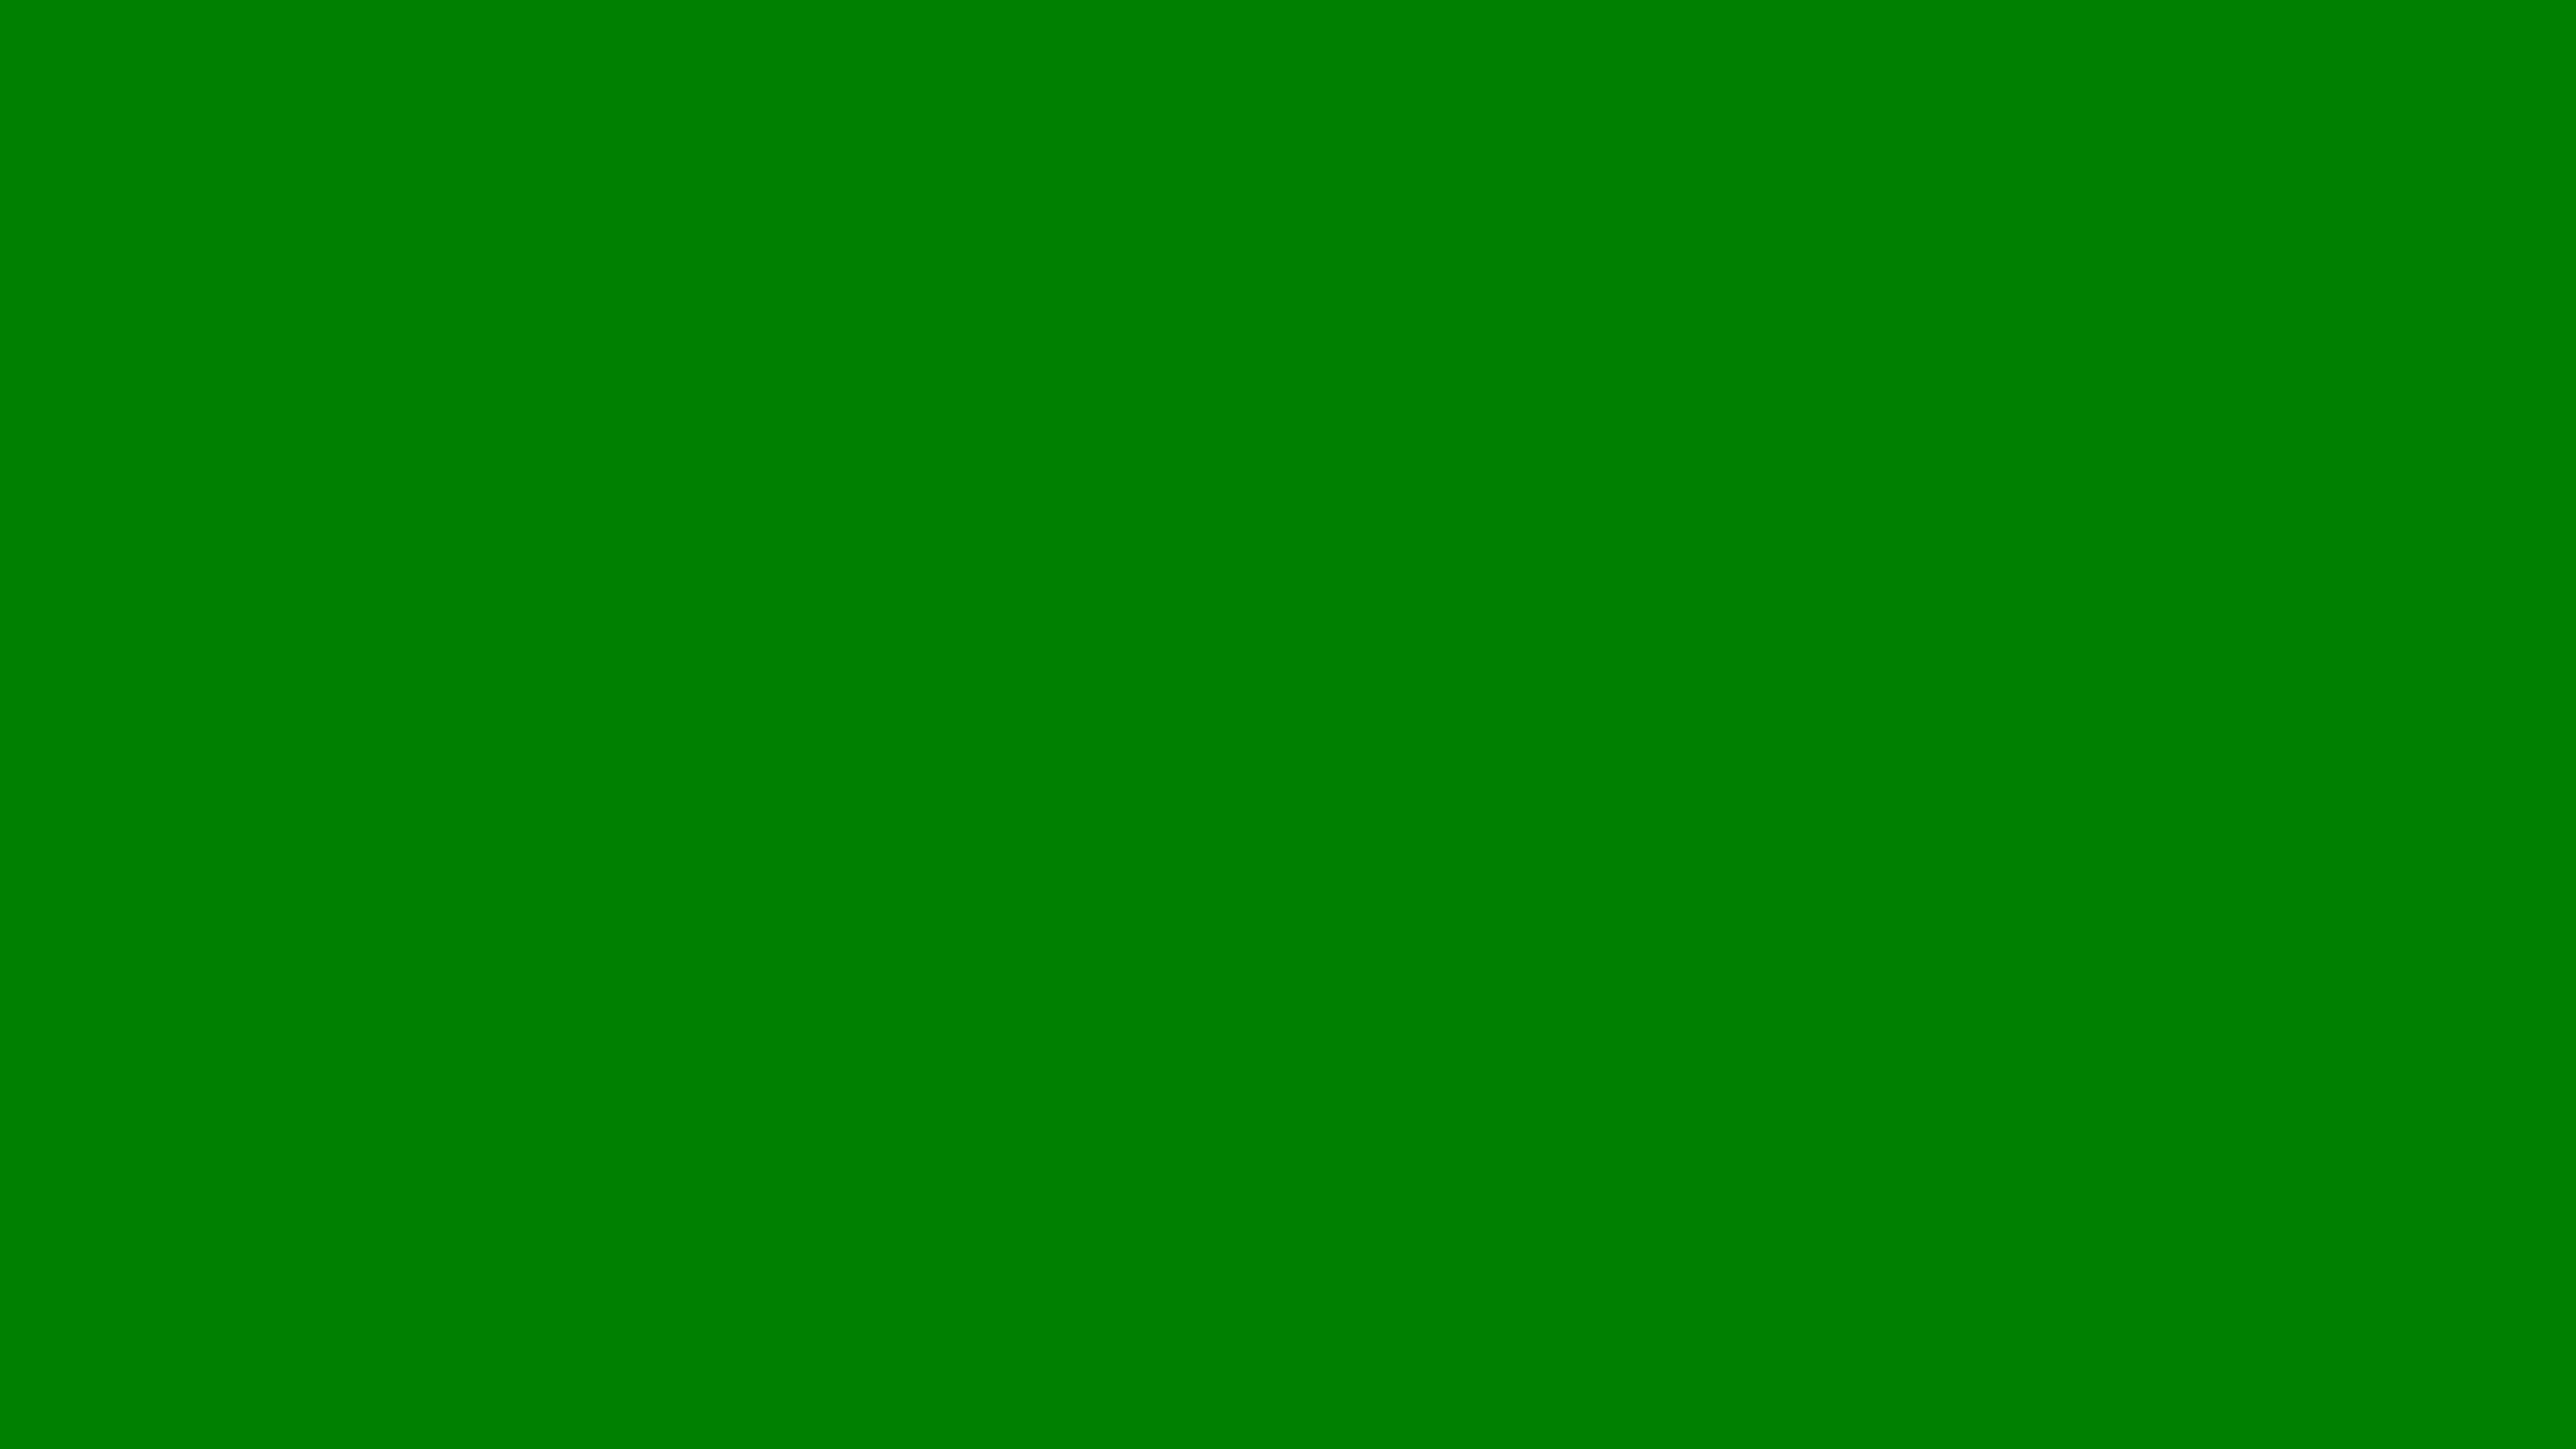 7680x4320 Office Green Solid Color Background